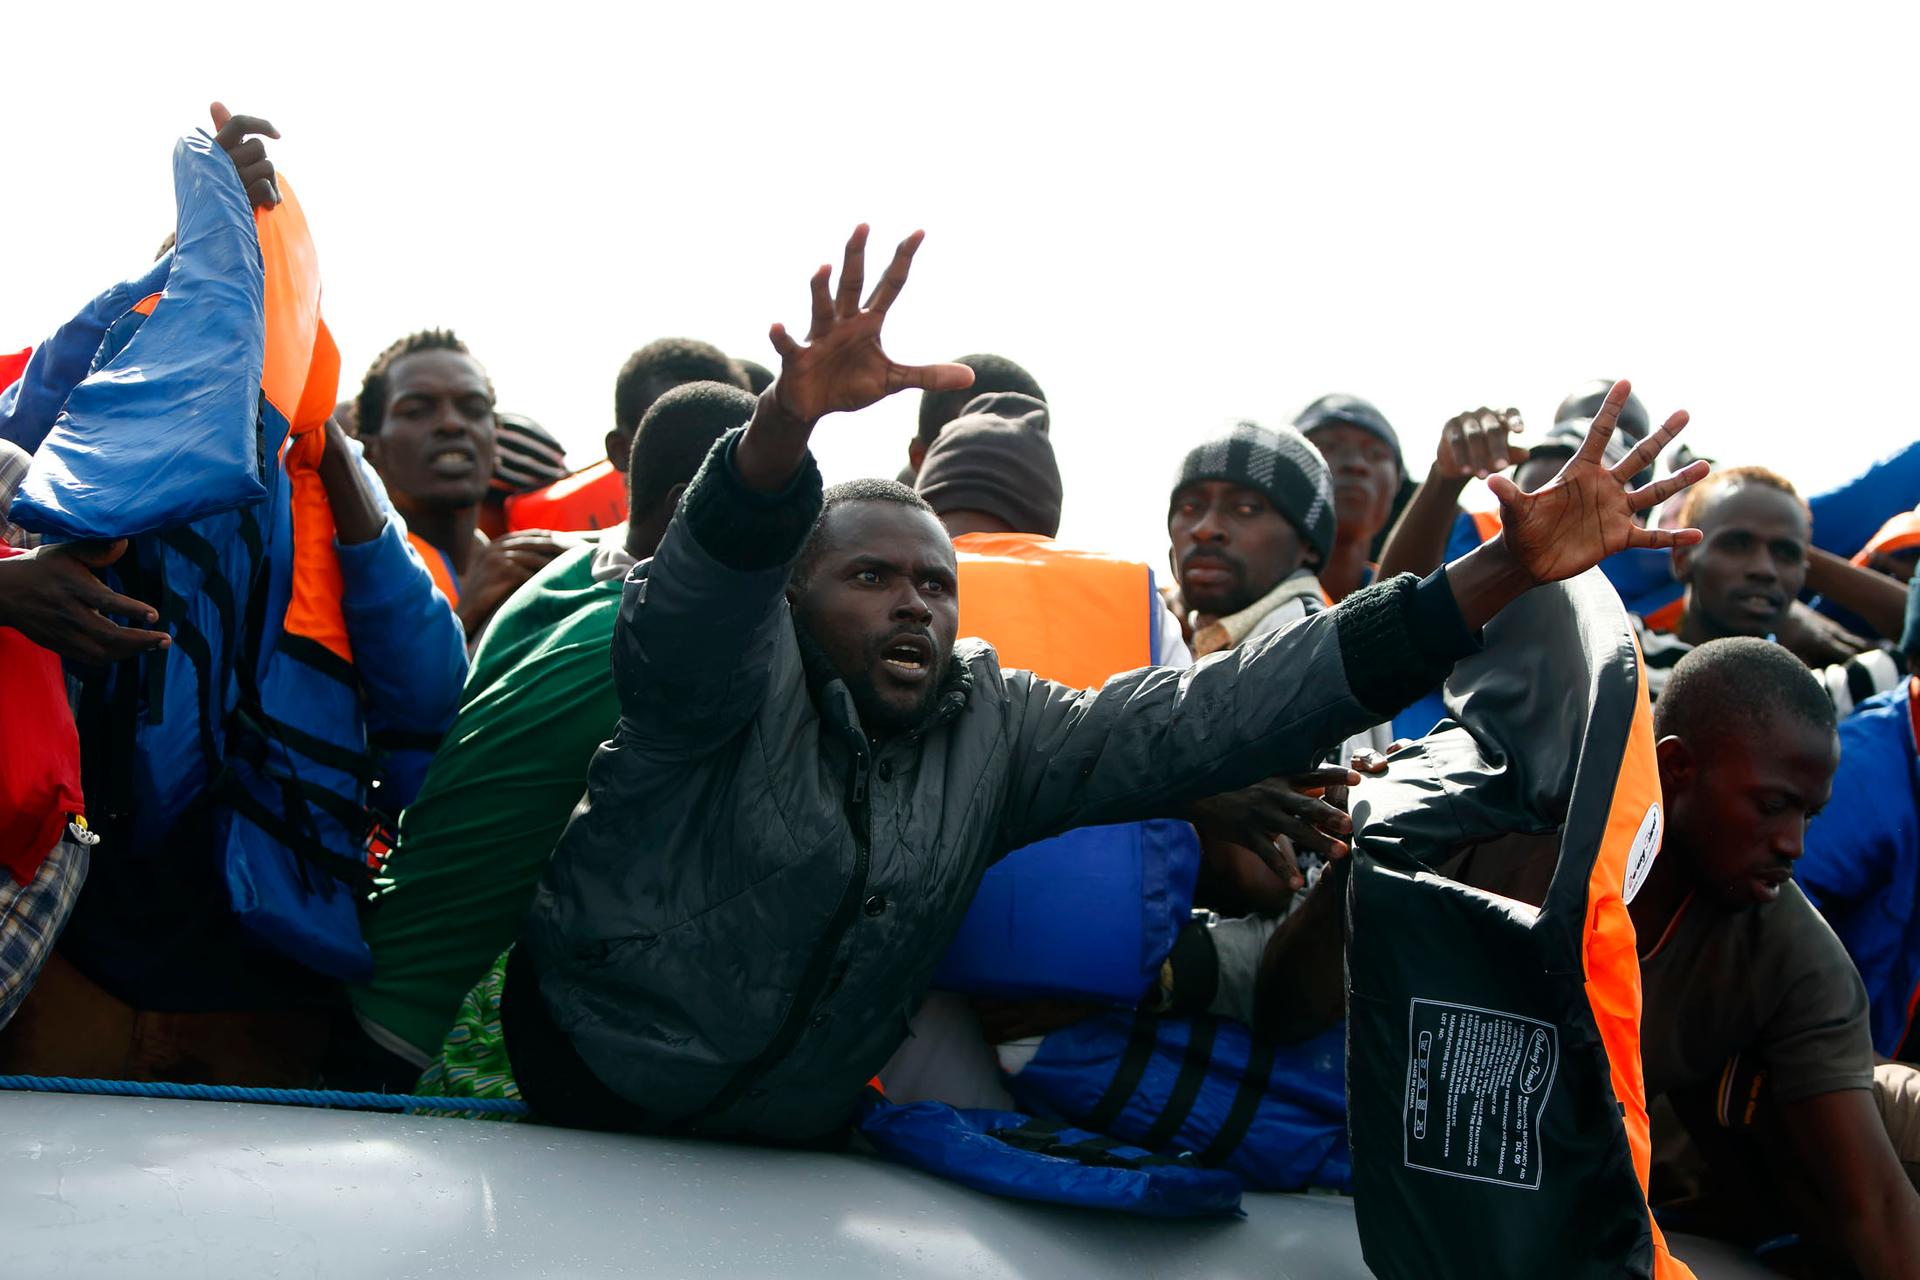 EU leaders have committed extra ships, planes and helicopters to save lives in the Mediterranean at an emergency summit. More than 1,300 migrants have died in April 2015.